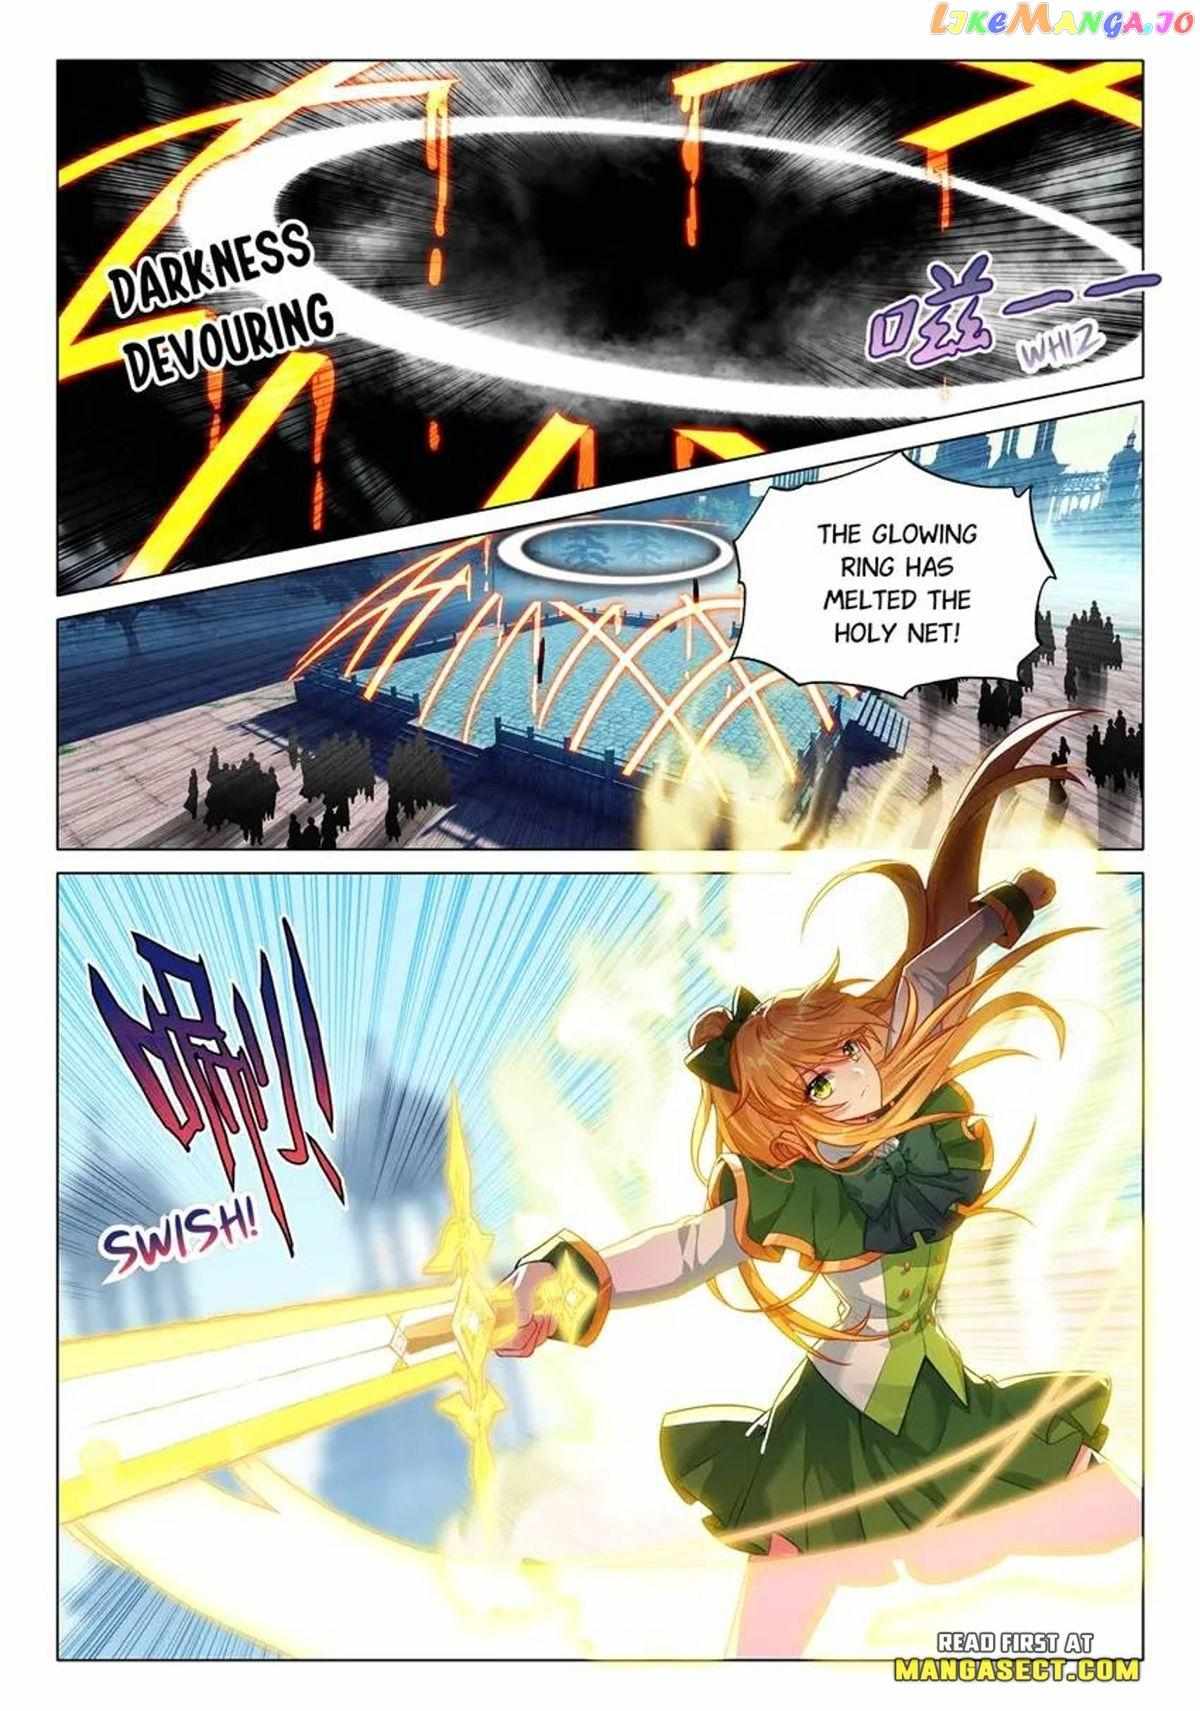 Douluo Dalu 3: The Legend Of The Dragon King - Page 3